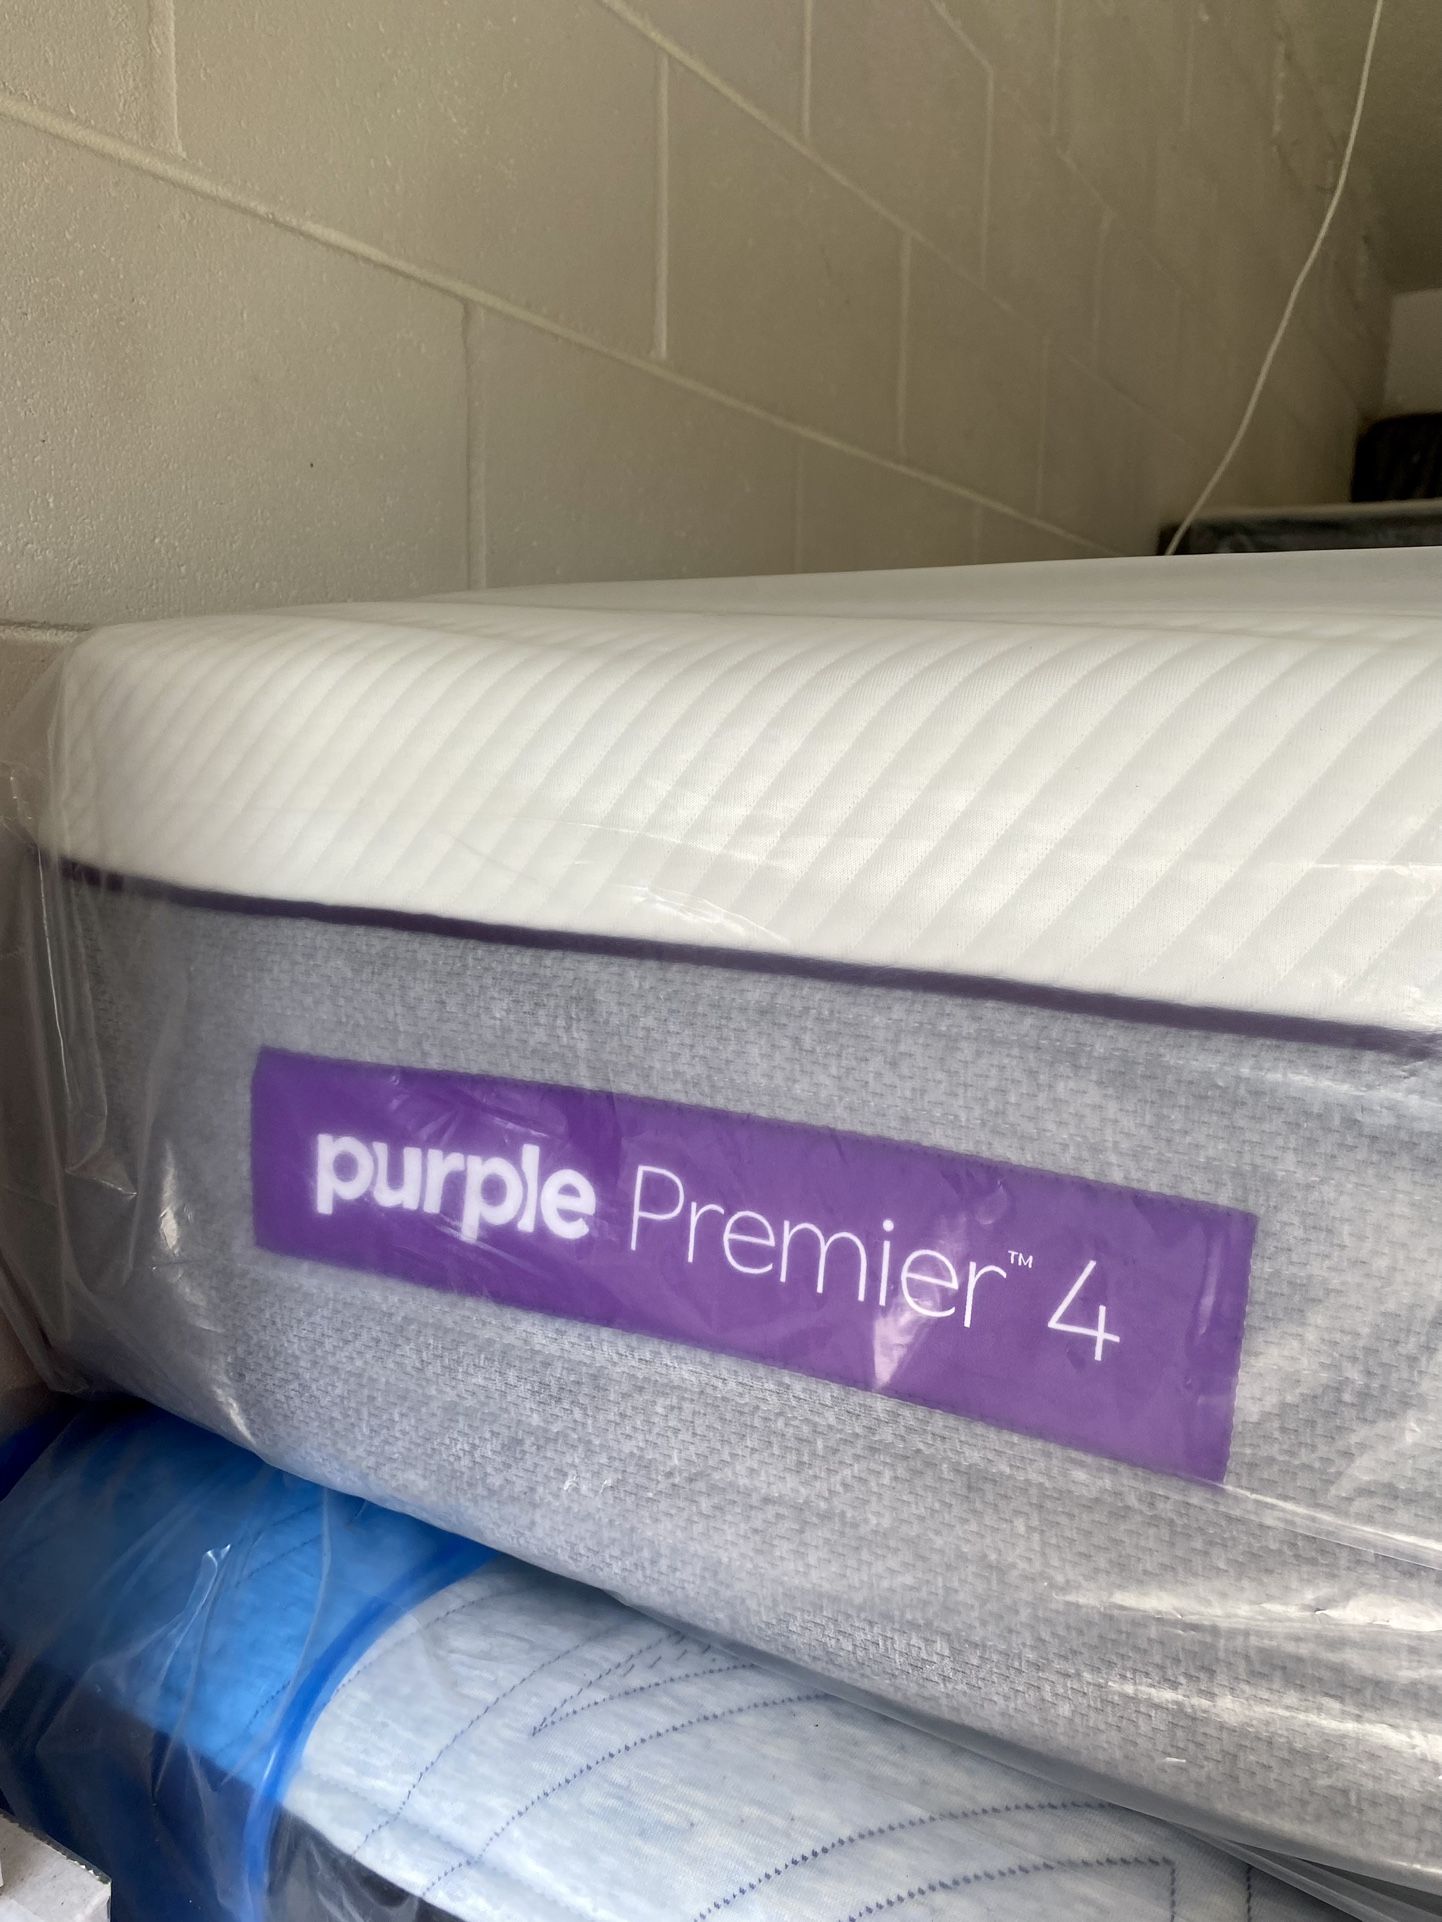 Queen Size Purple Premier 4 Hybrid Mattress Direct From Factory Same Day Delivery 